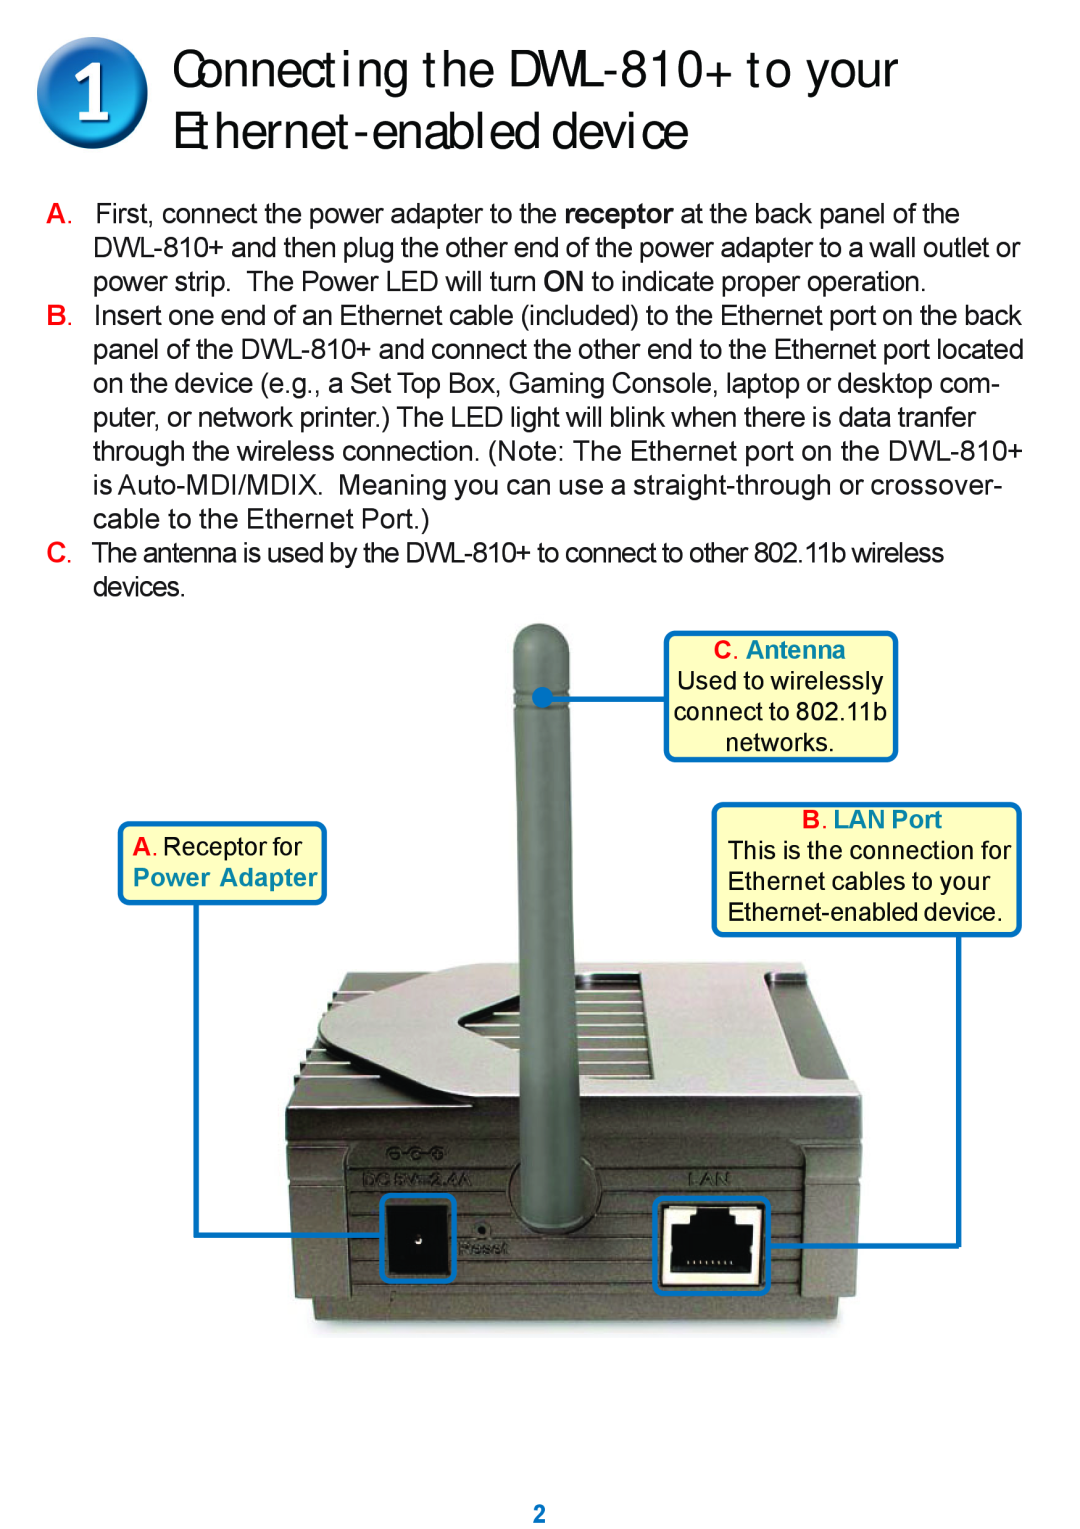 D-Link manual Connecting the DWL-810+ to your Ethernet-enabled device, Power Adapter, C. Antenna 